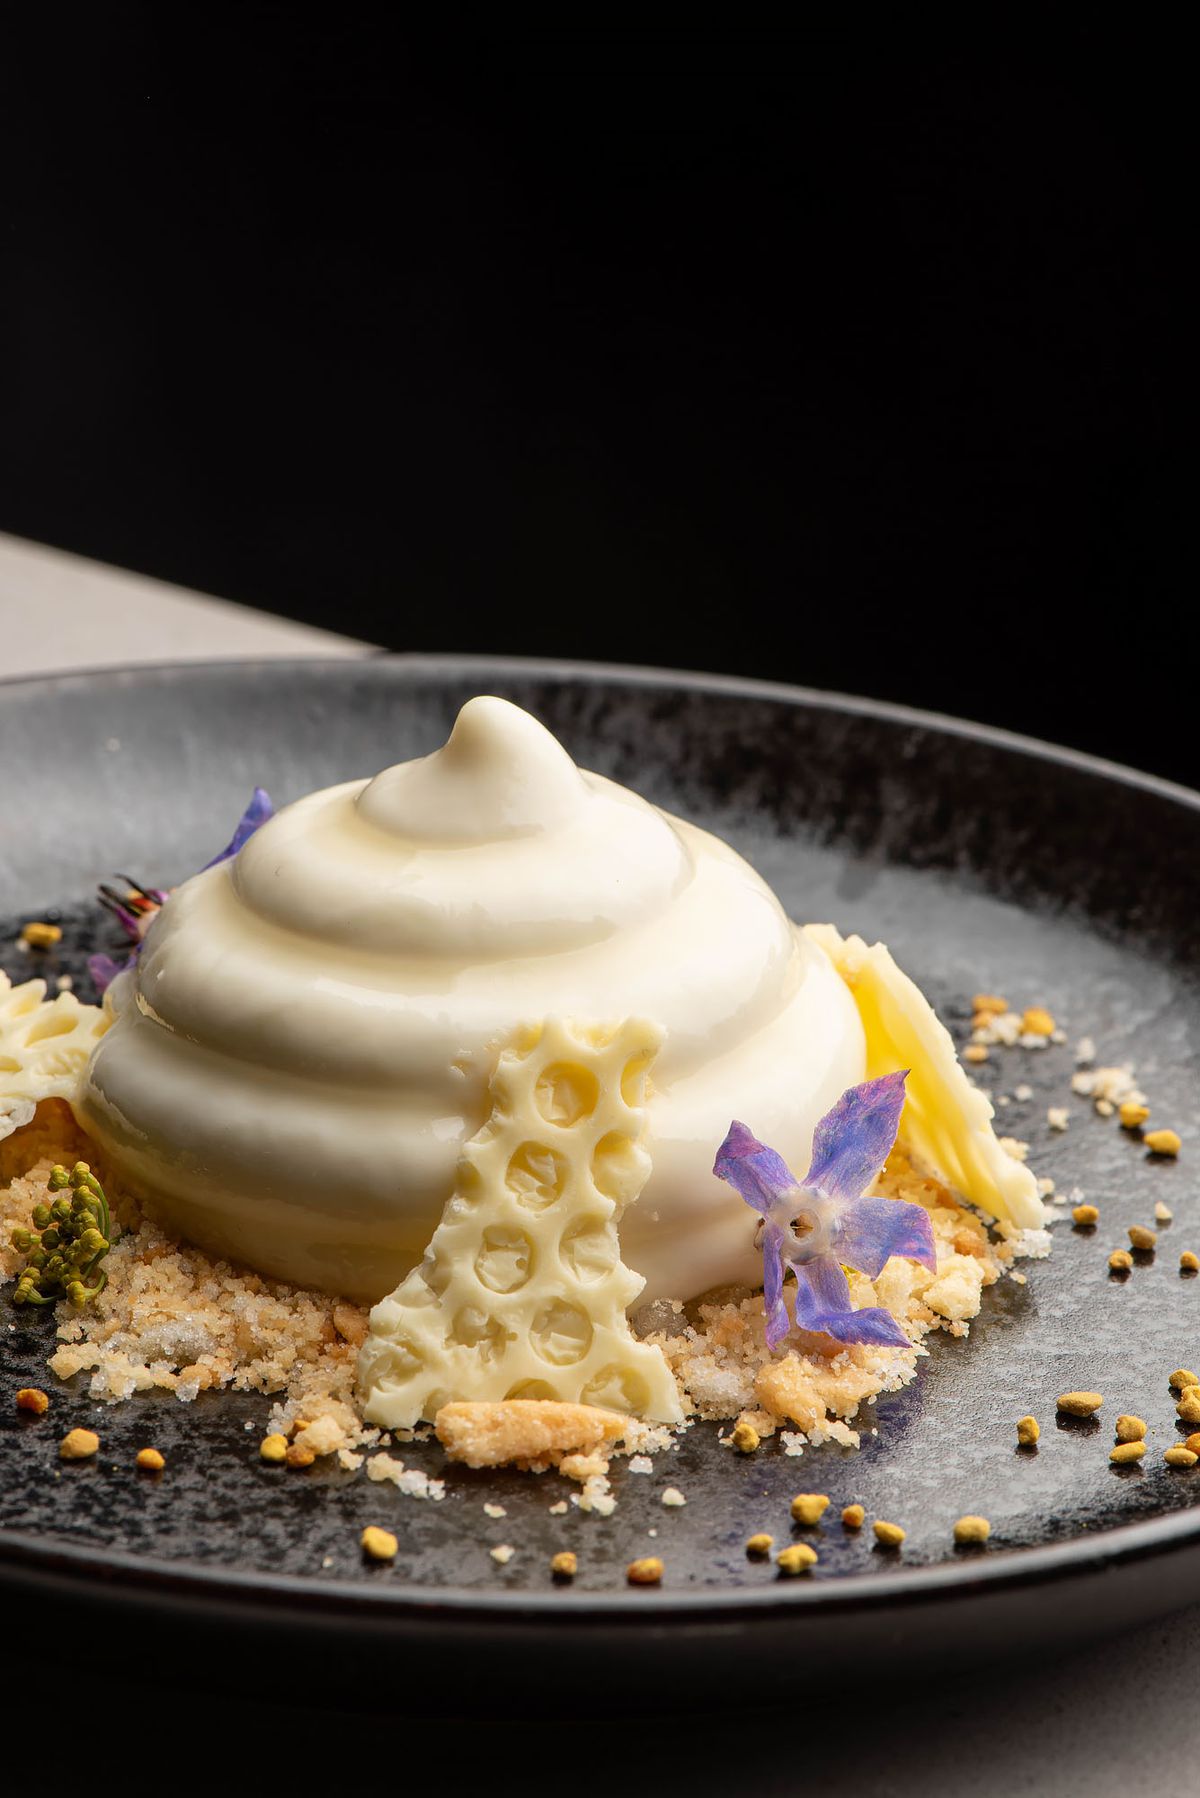 Beehive-shaped panna cotta with white chocolate.